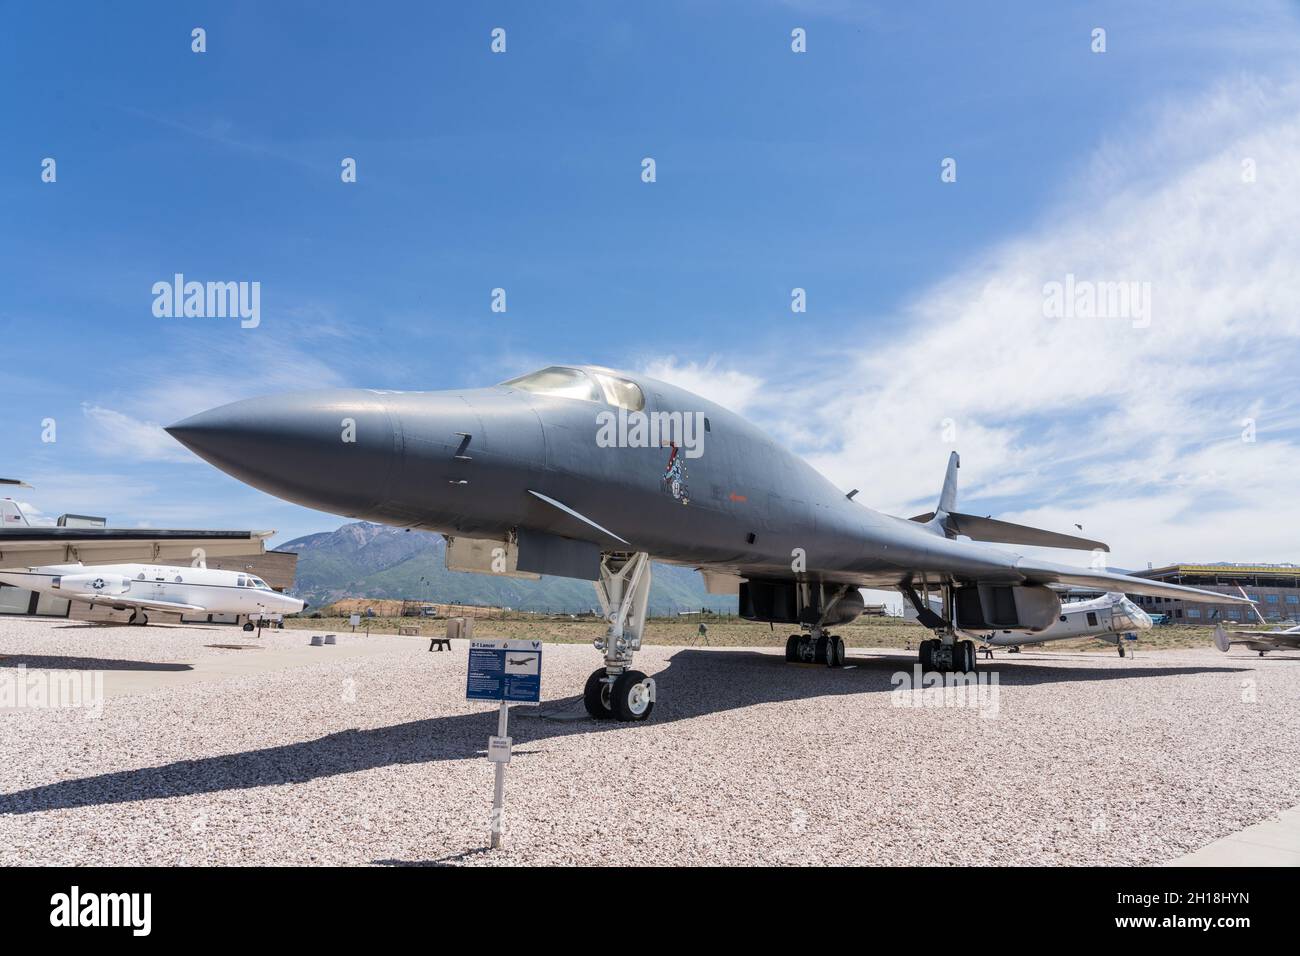 A Rockwell B-1 Lancer supersonic strategic bomber at the Hill Aerospace Museum in Utah. Stock Photo